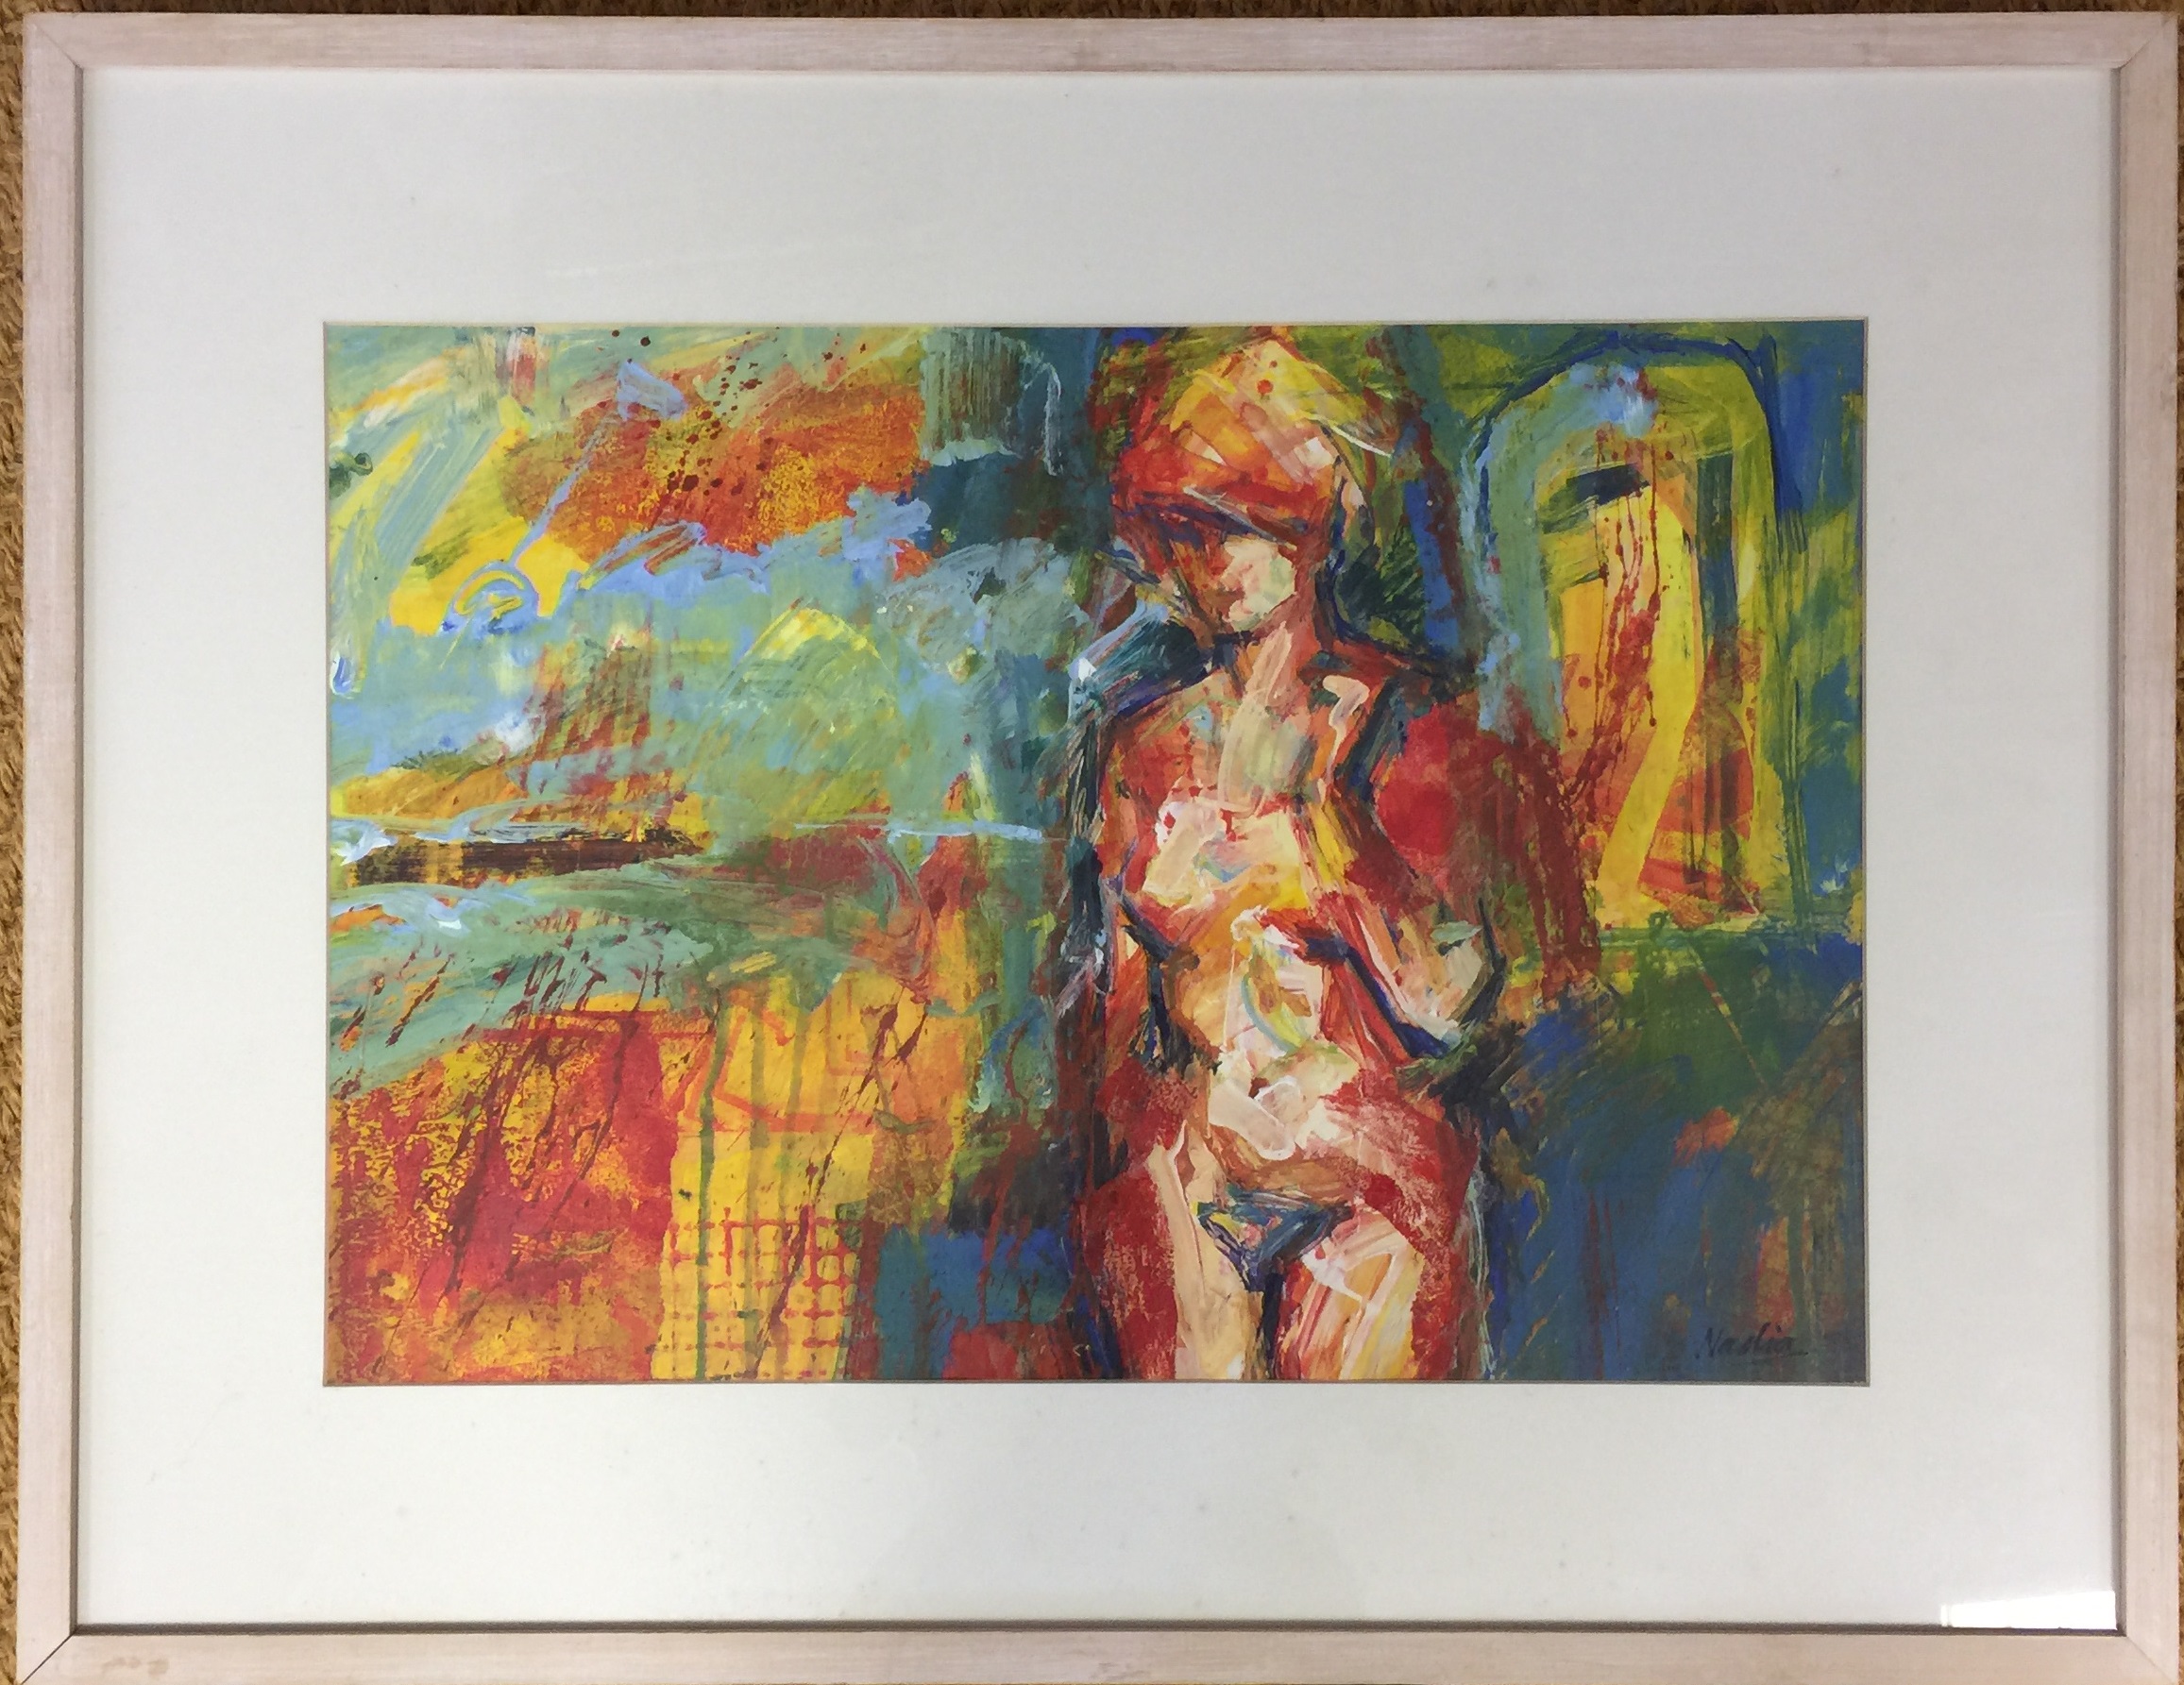 FRAMED PAINTINGS. A pair of framed works by a possibly Russian artist, signed 'Nadia'. - Image 3 of 3